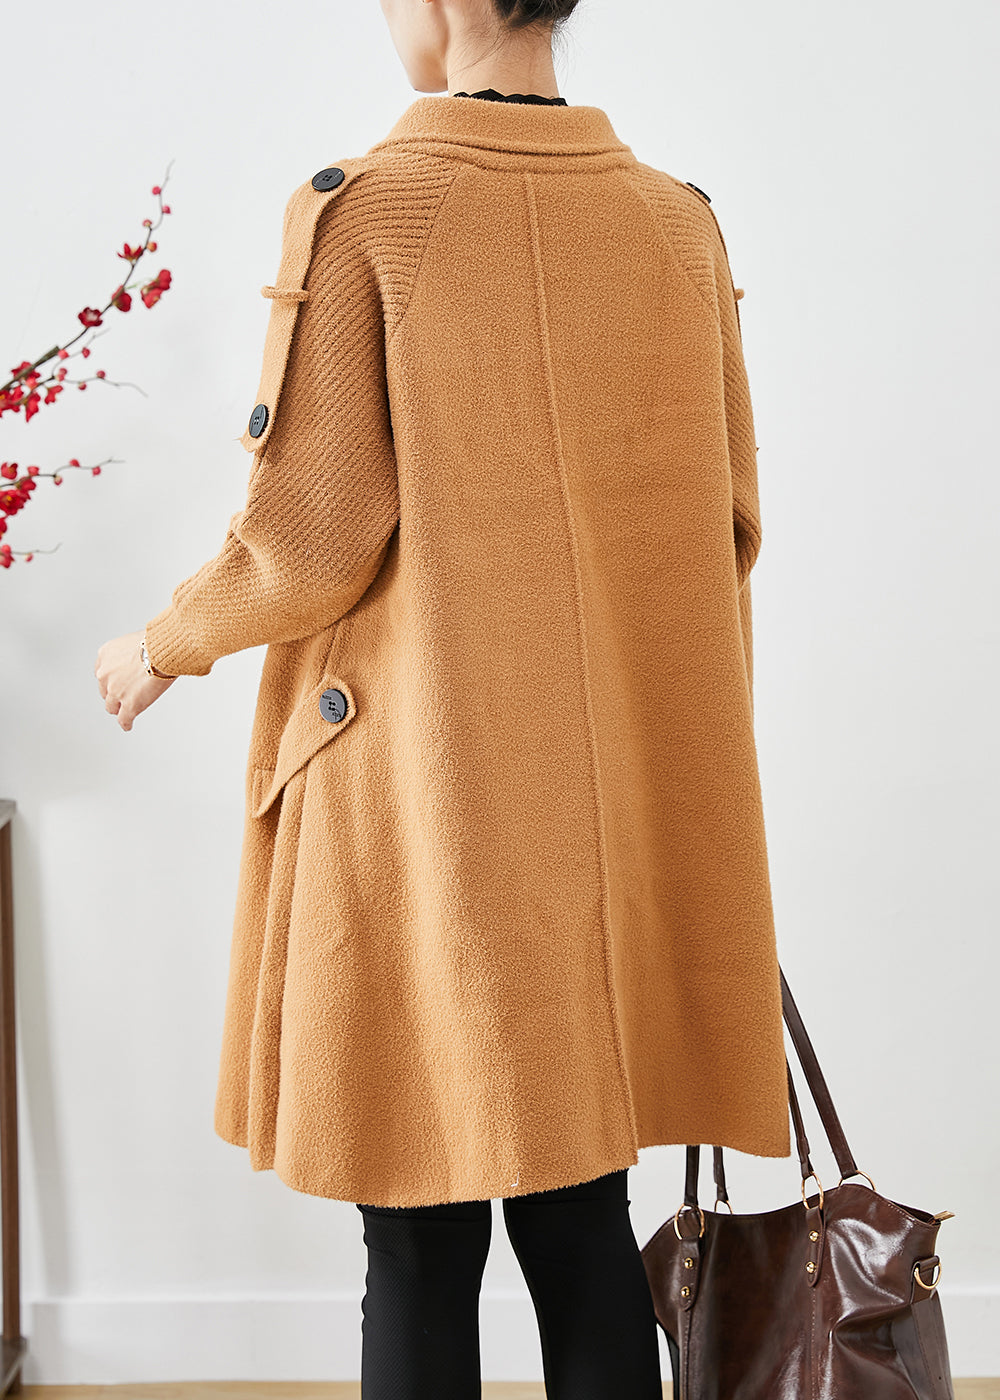 Boho Light Camel Double Breast Patchwork Knit Woolen Trench Coats Fall